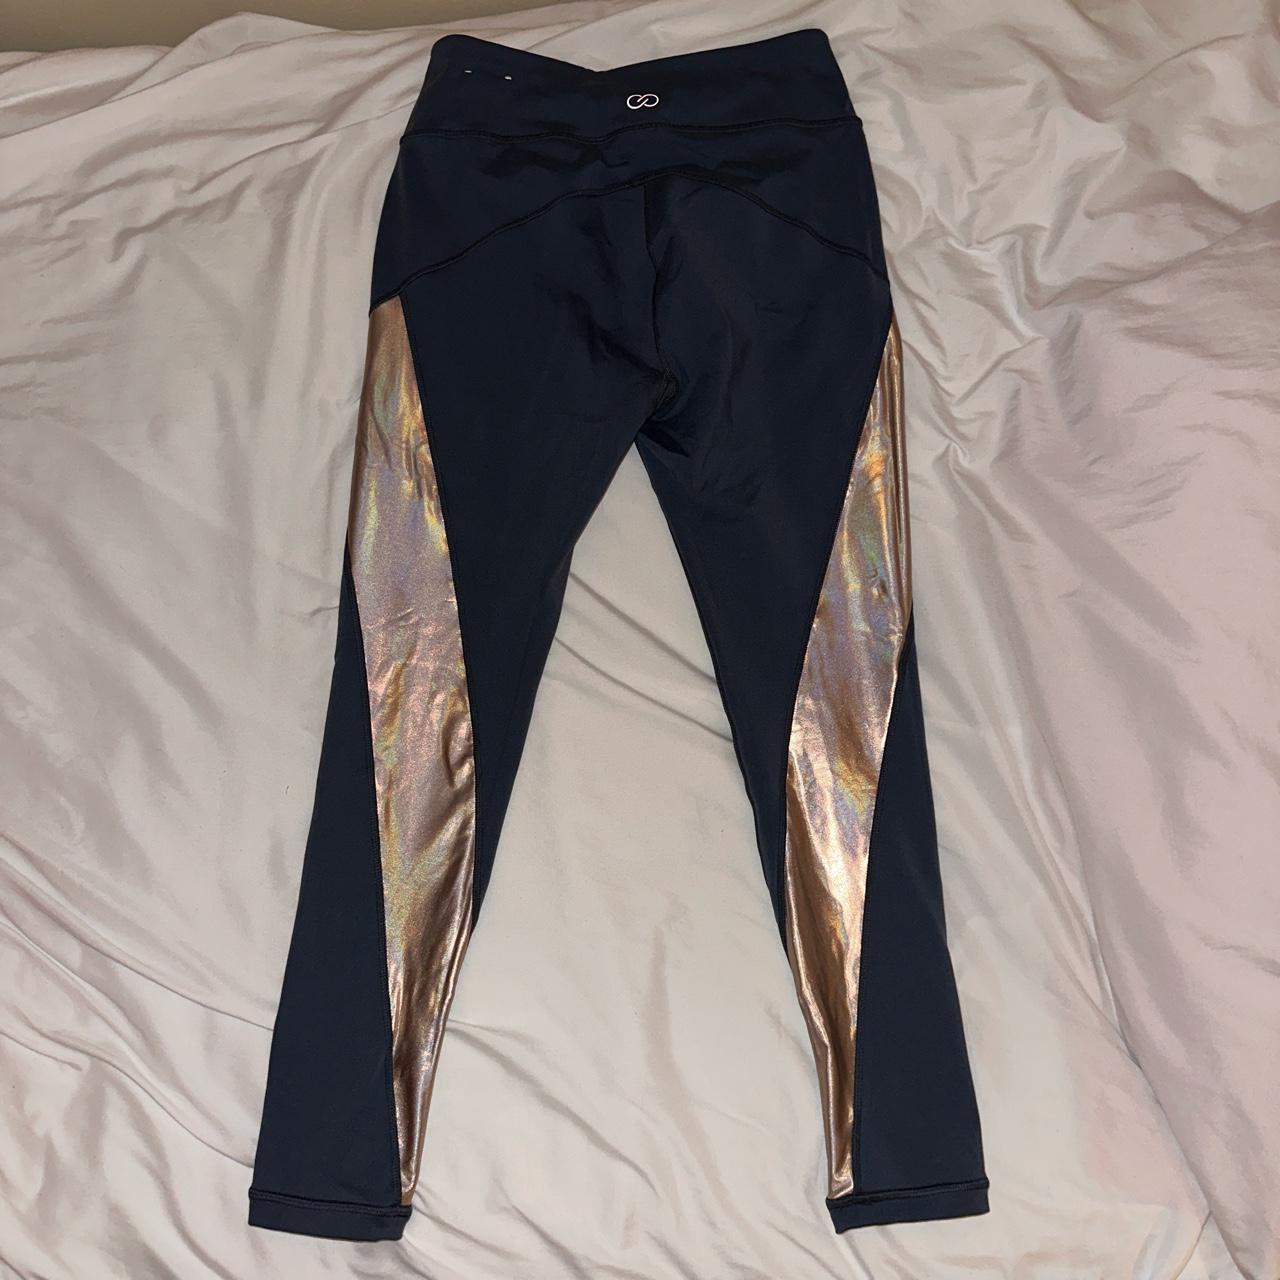 Calia by Carrie CALIA Carrie Underwood Rose Gold Leggings Size